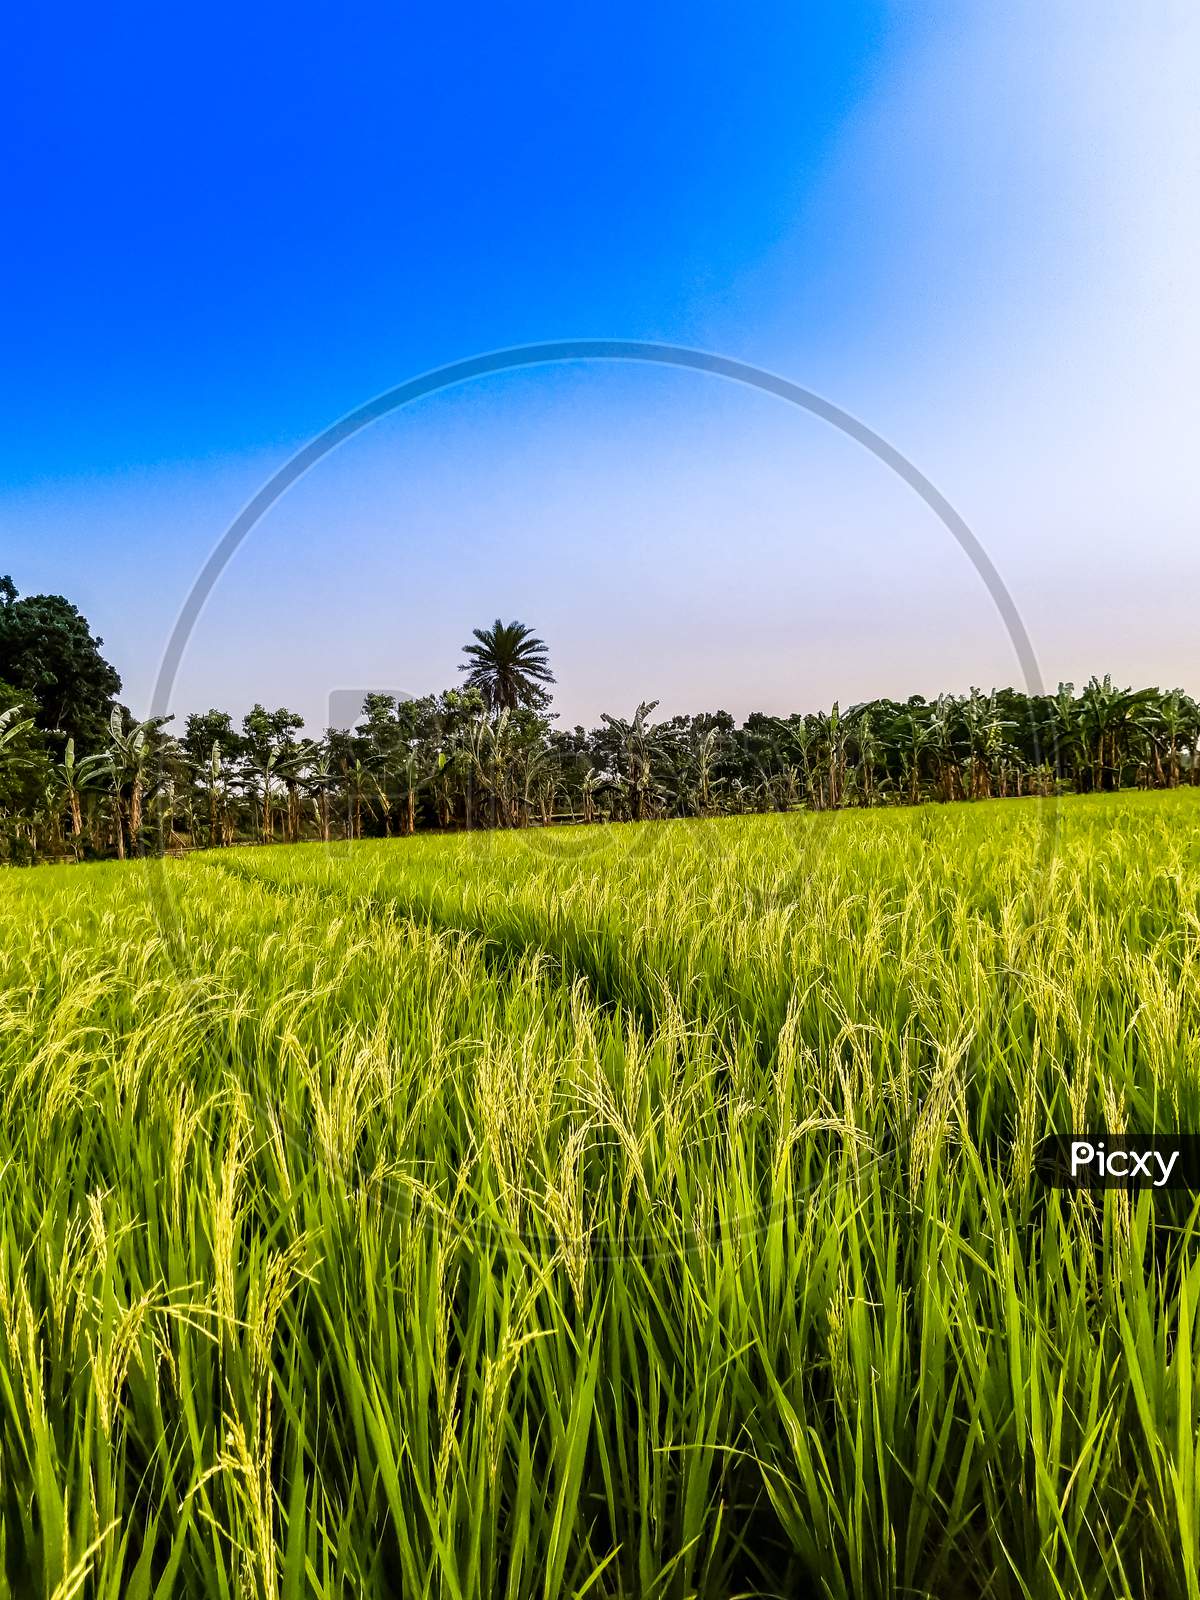 Green Paddy Land And Blue Sky With White Clouds And Environment.